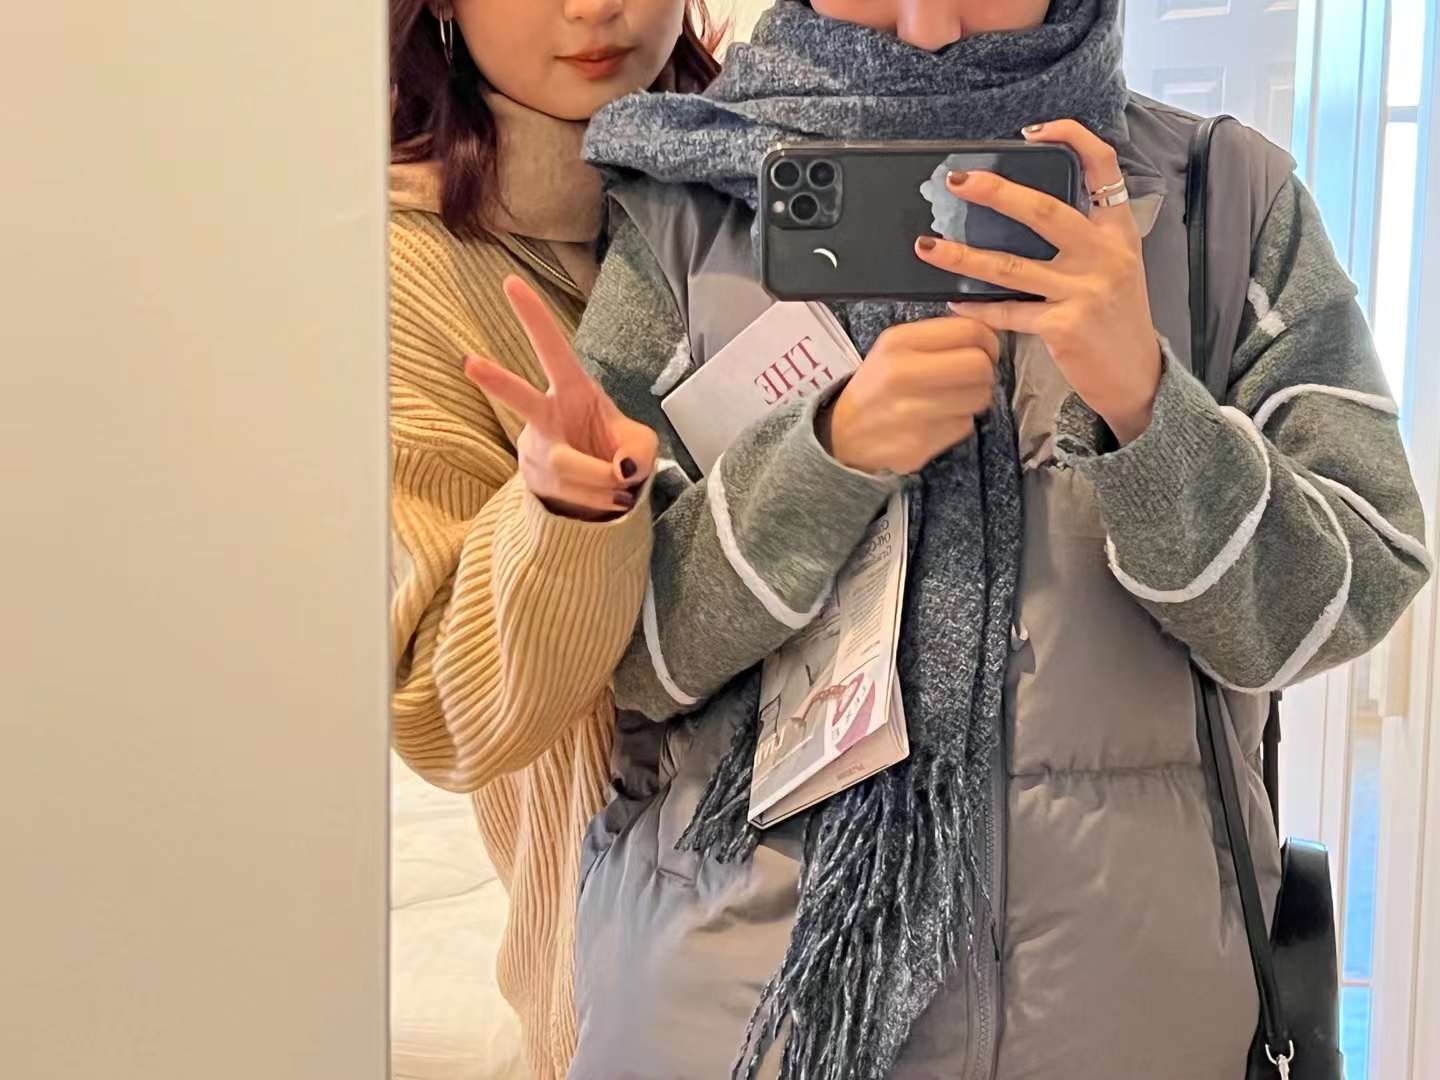 A mirror selfie of two females wearing winter clothes.